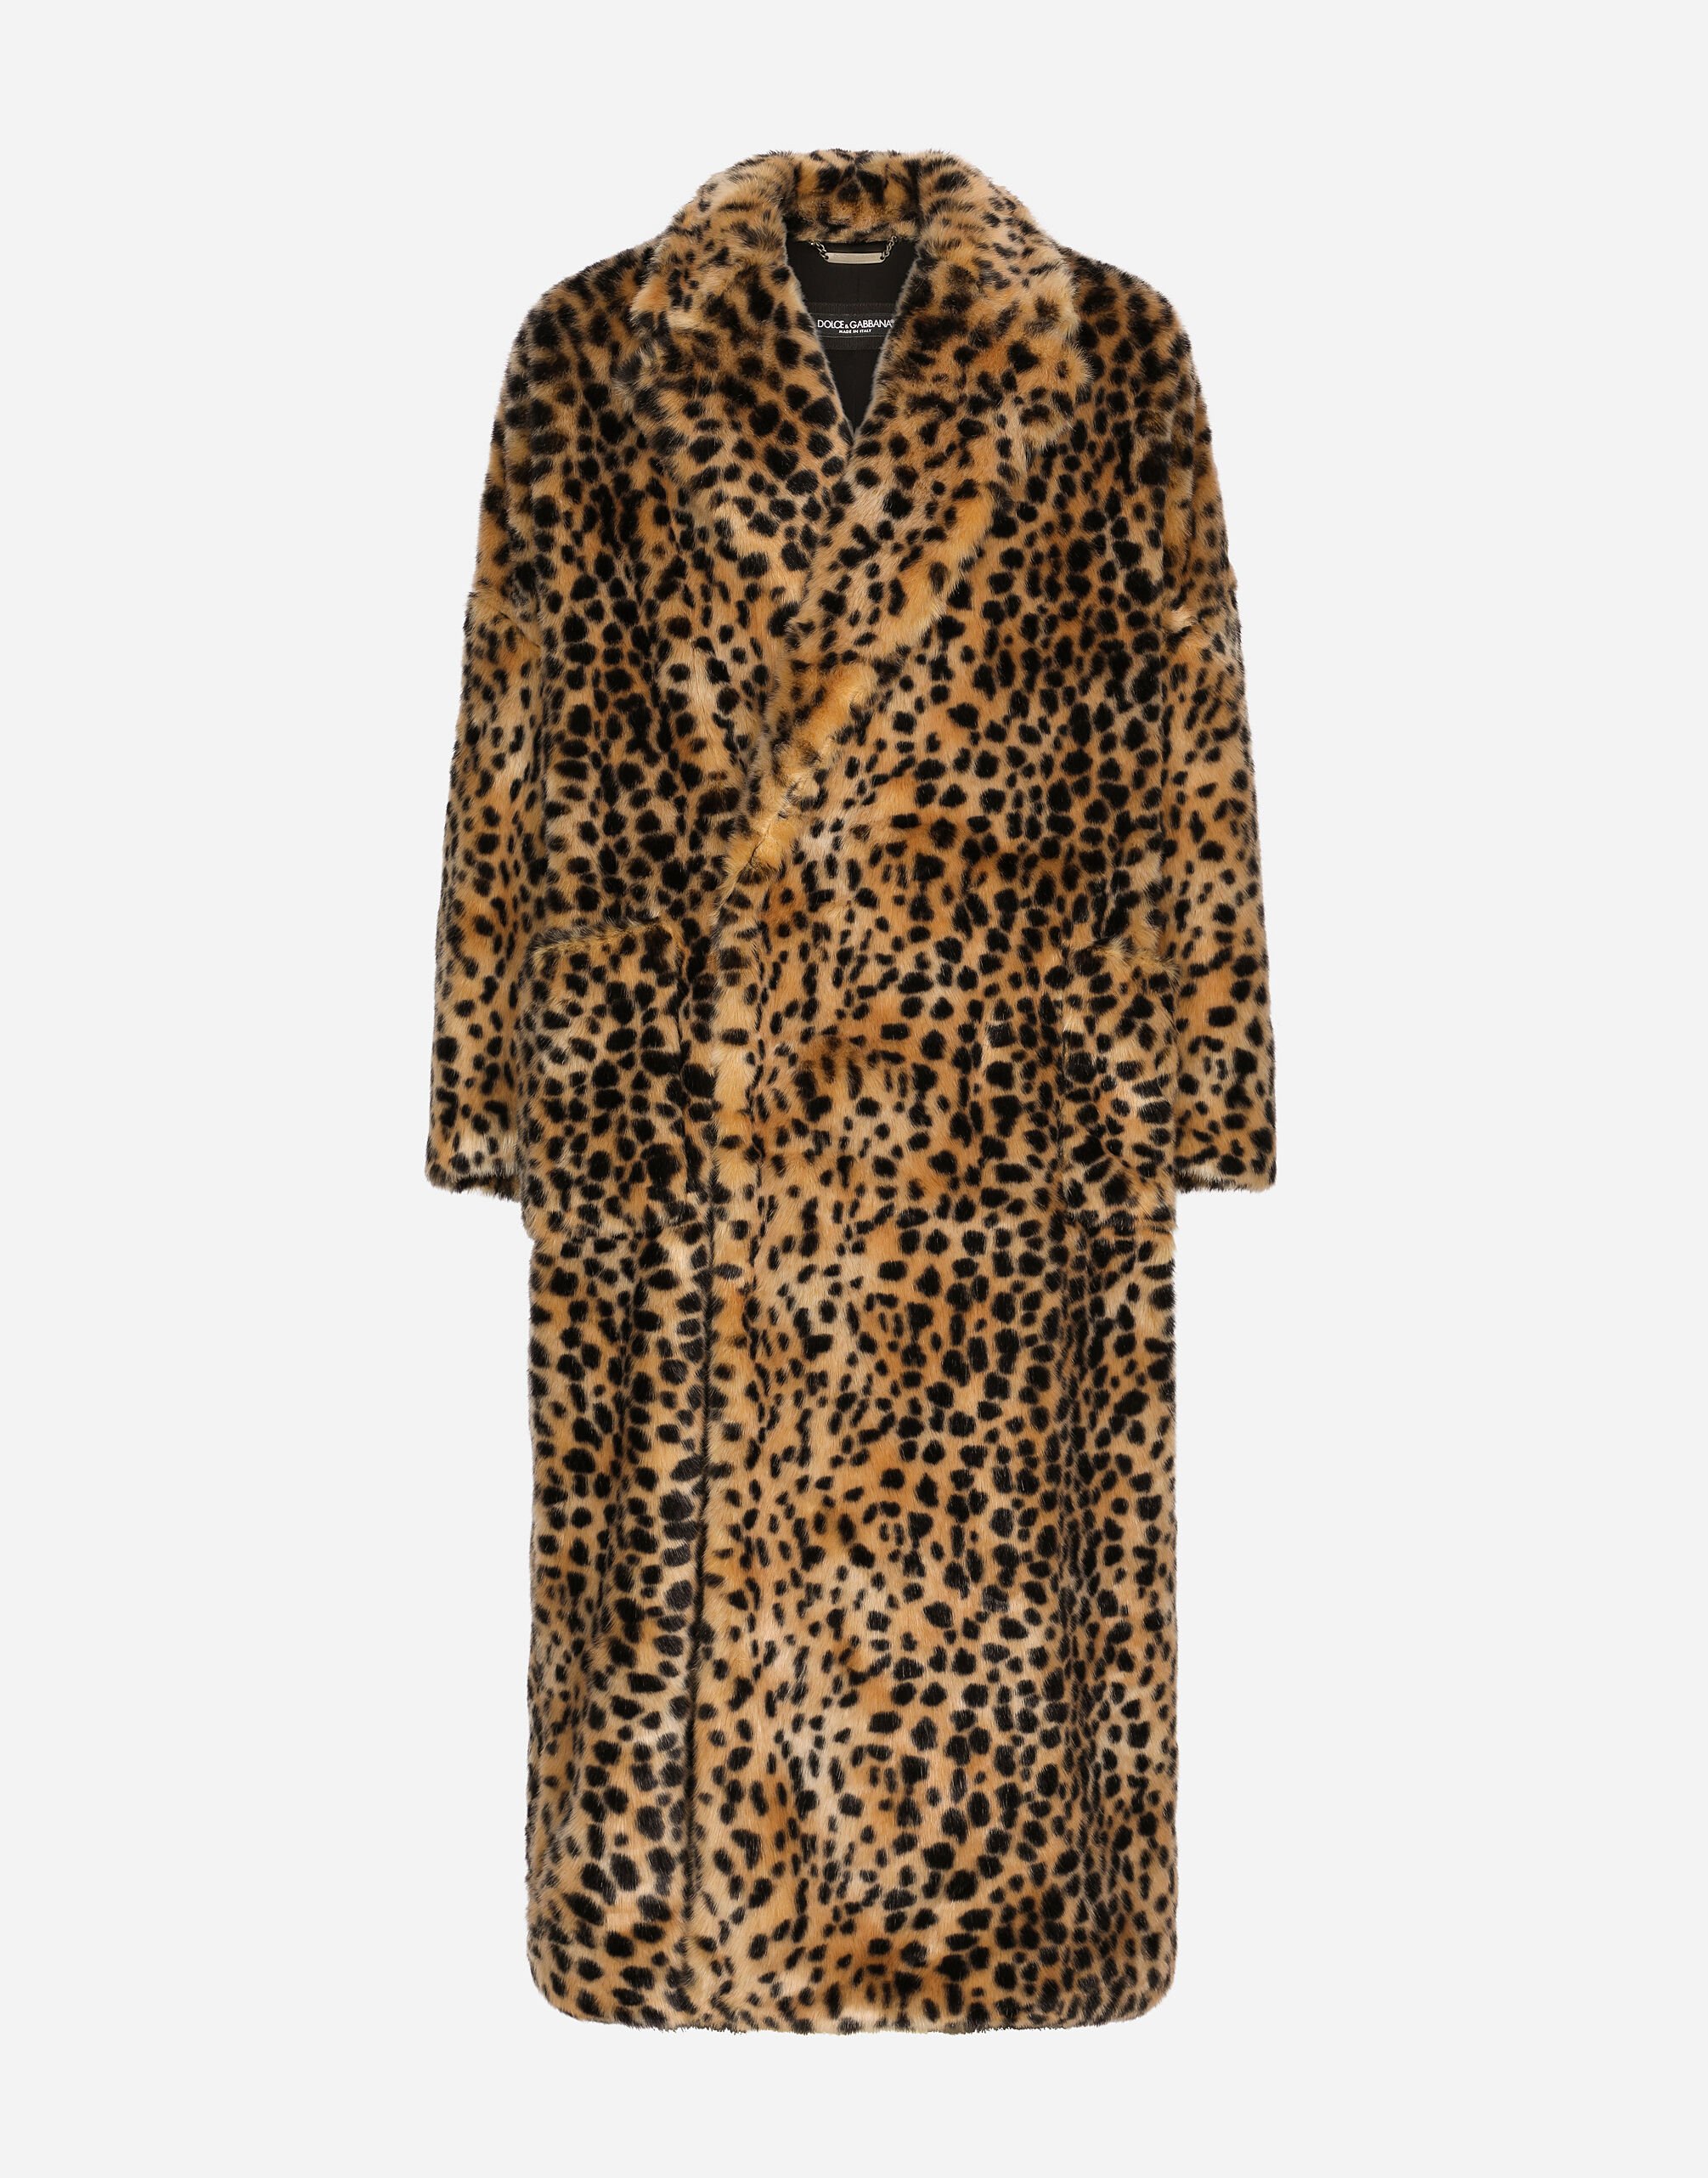 Dolce & Gabbana Single-breasted faux fur coat with leopard design Multicolor G034ATFUSUM